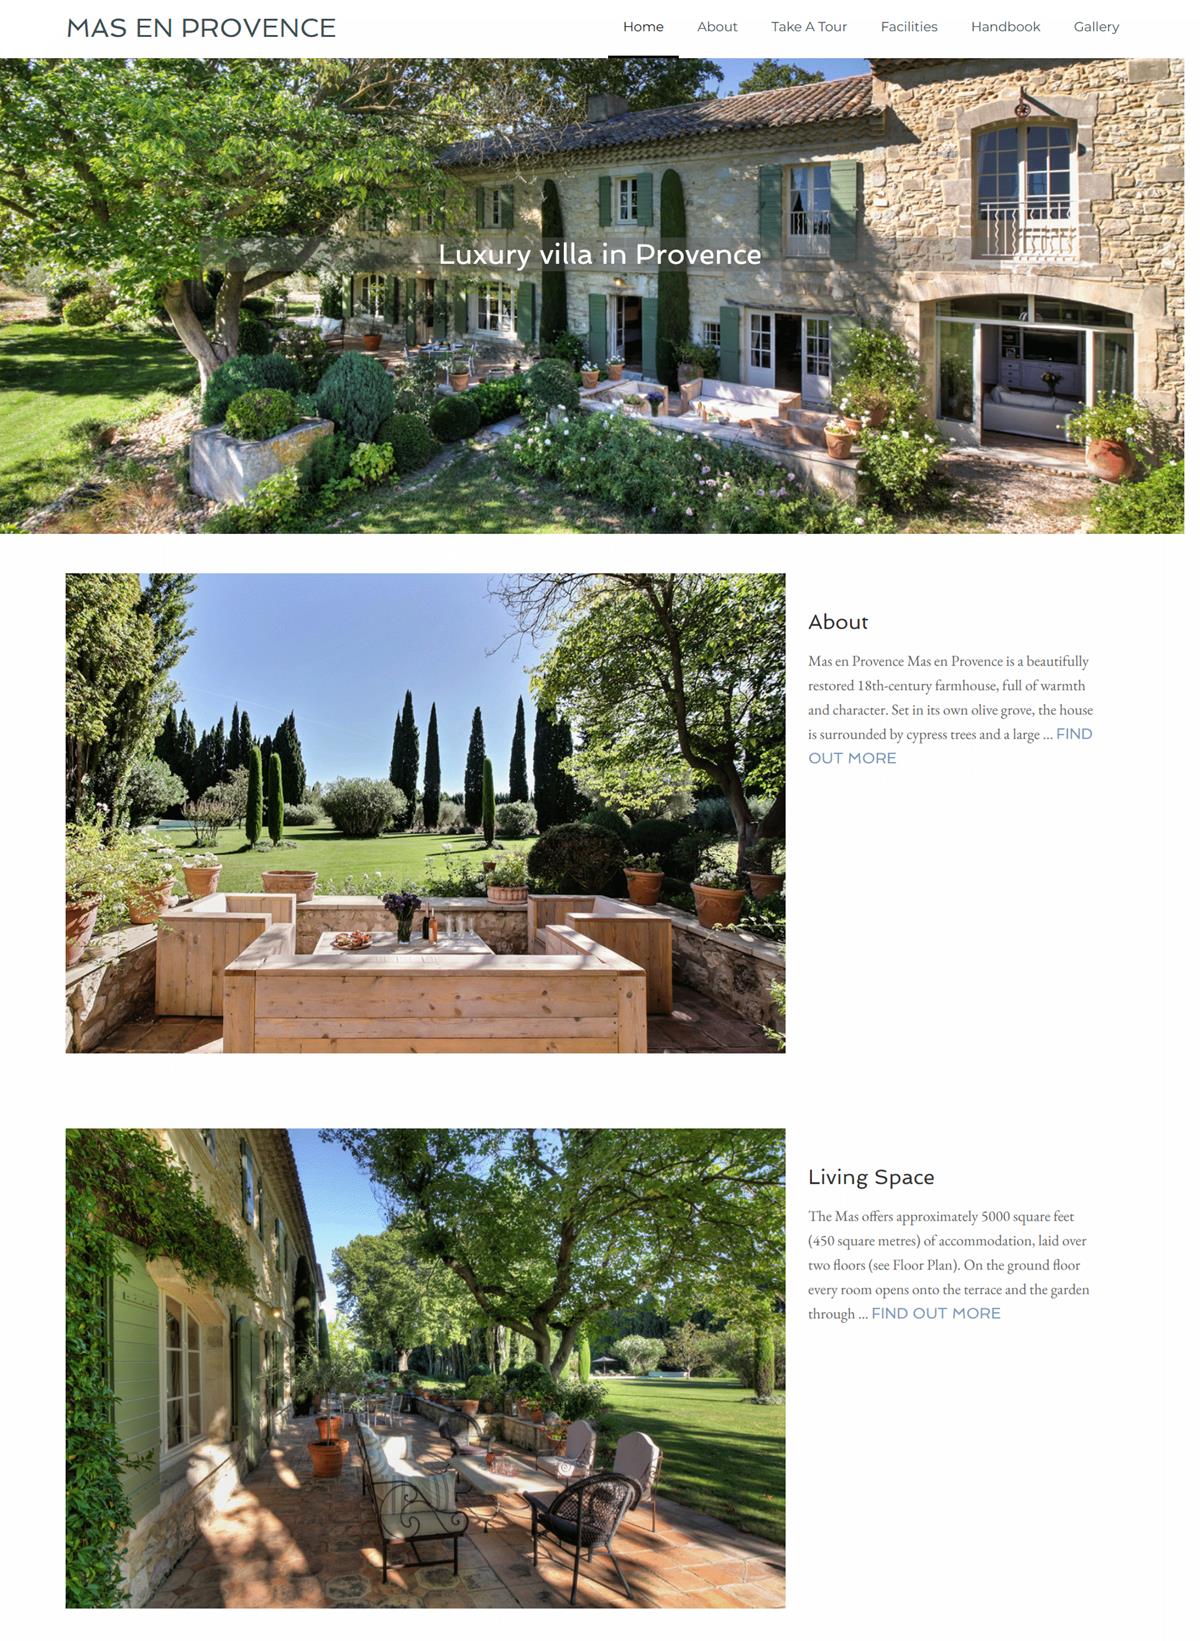 home page of the Mas en Provence web page, showing front of property and exterior shots.